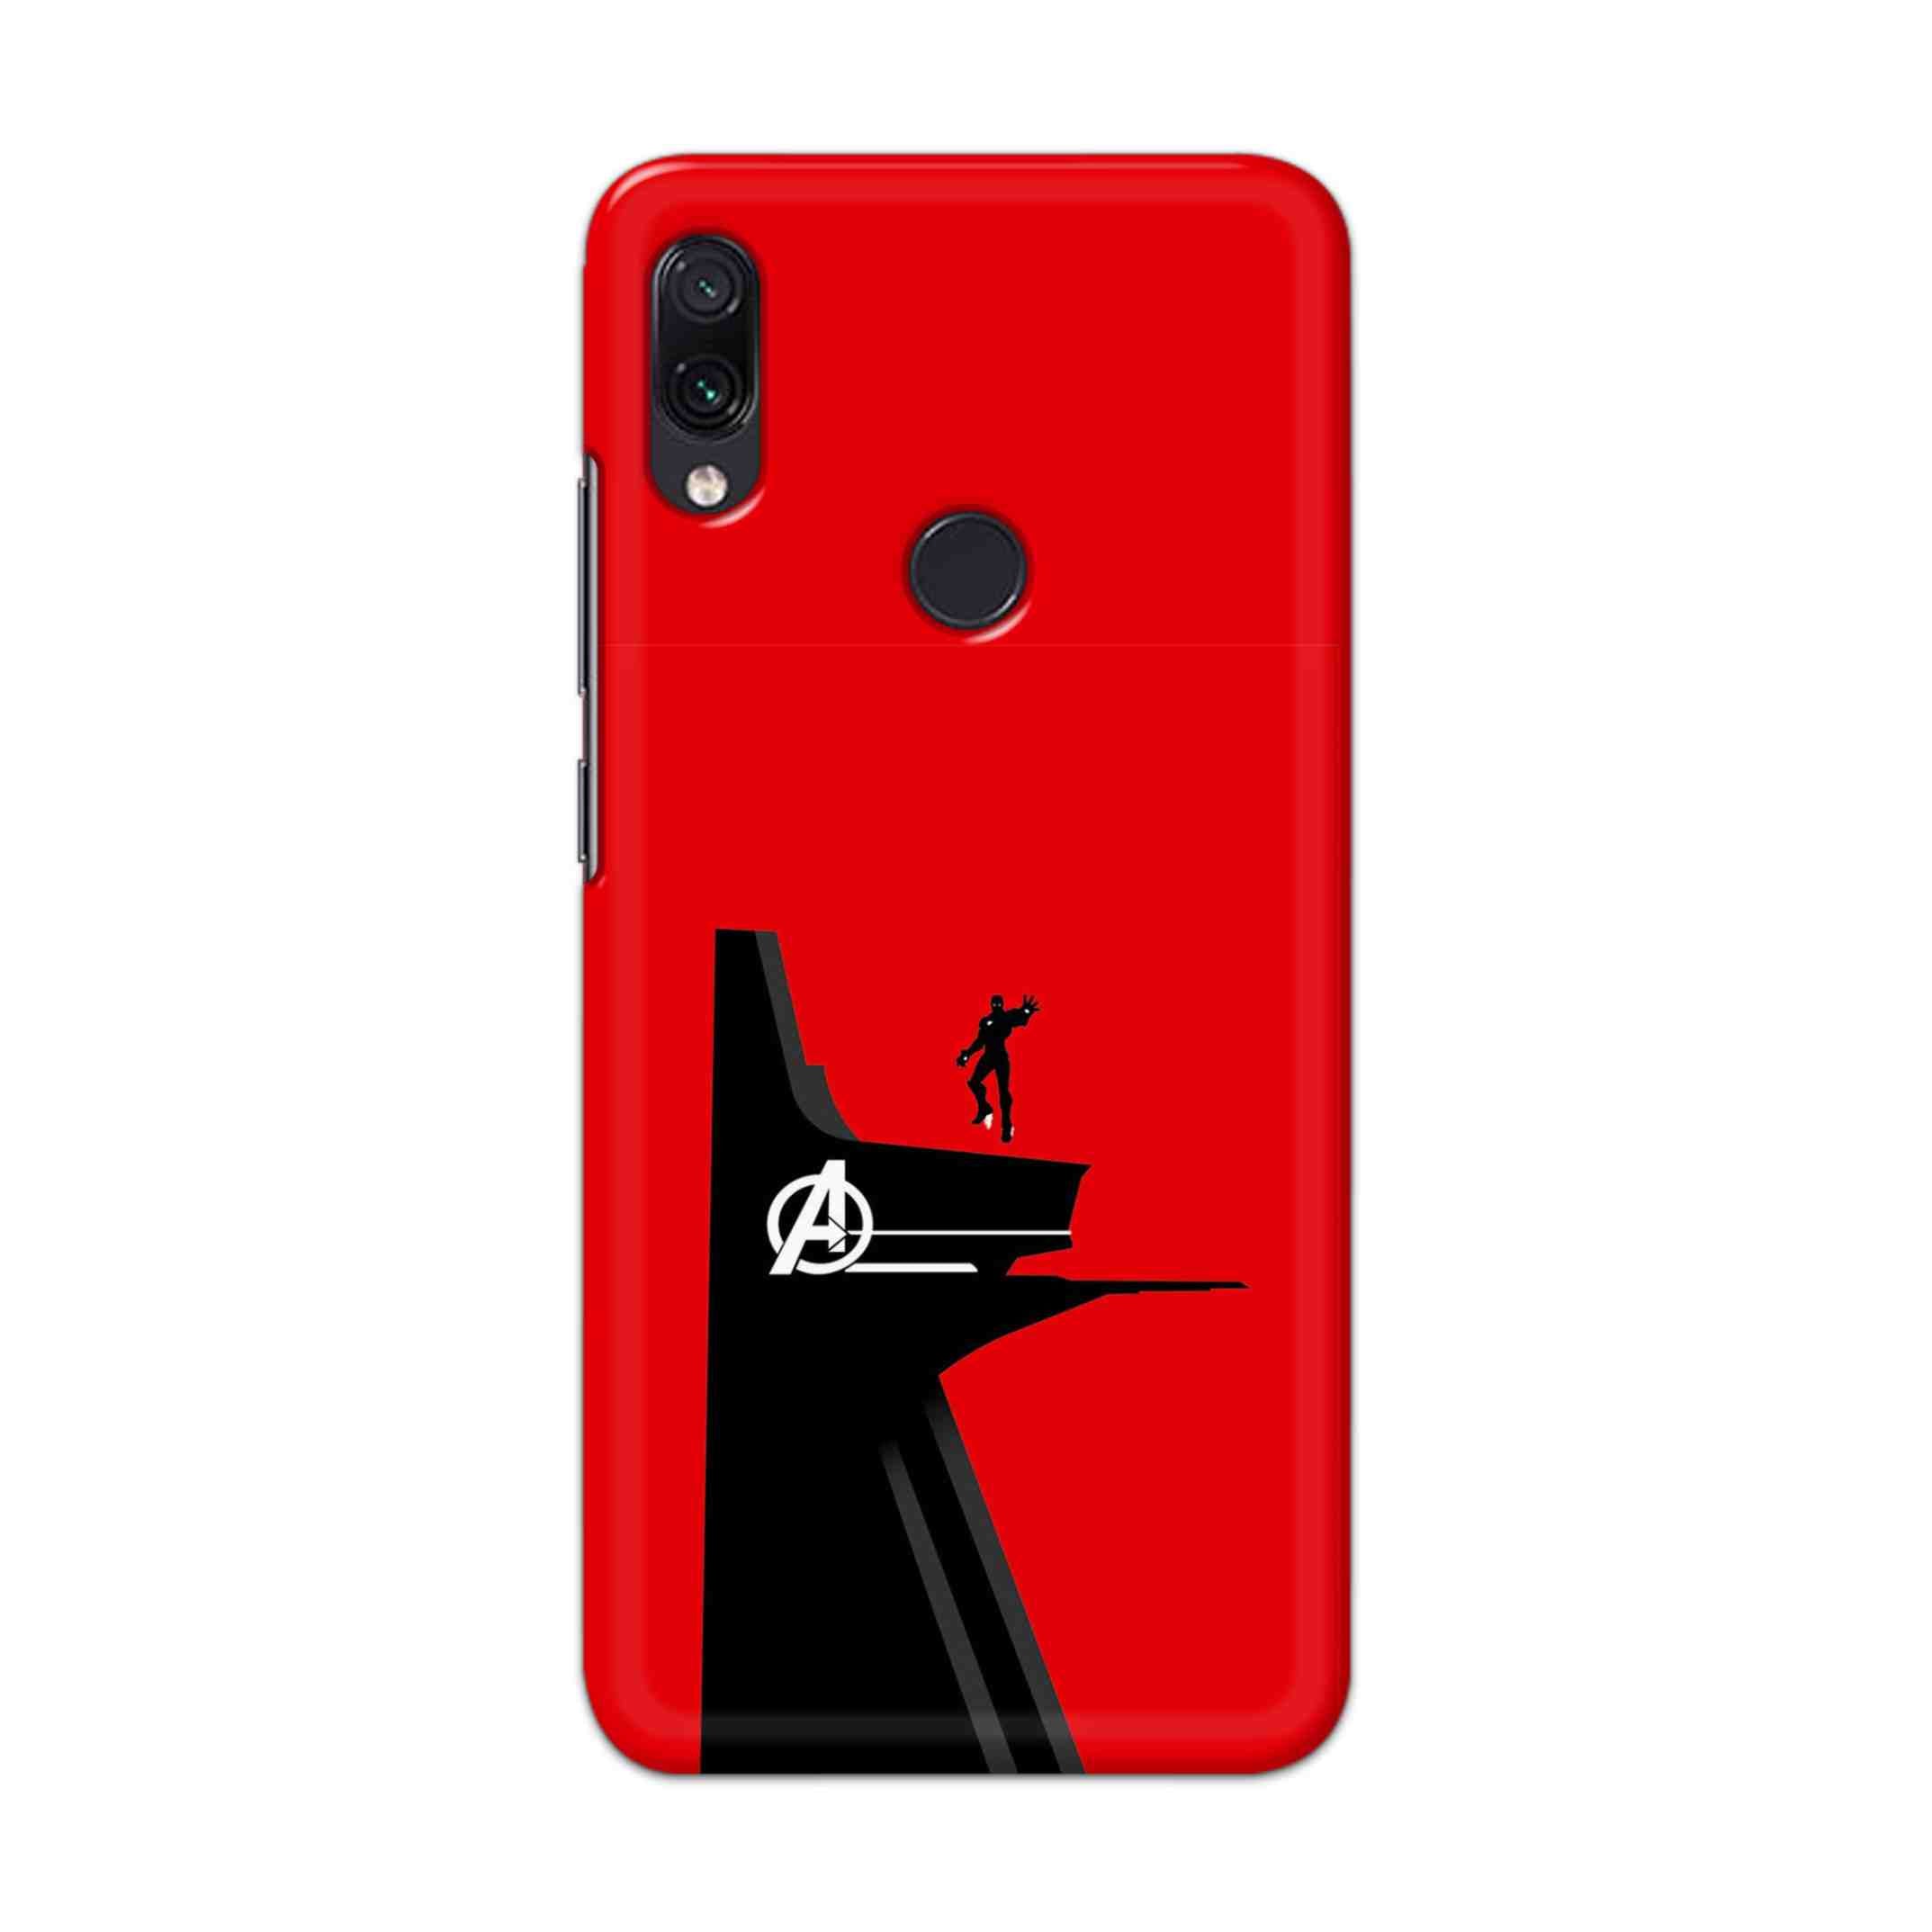 Buy Iron Man Hard Back Mobile Phone Case Cover For Redmi Note 7 / Note 7 Pro Online